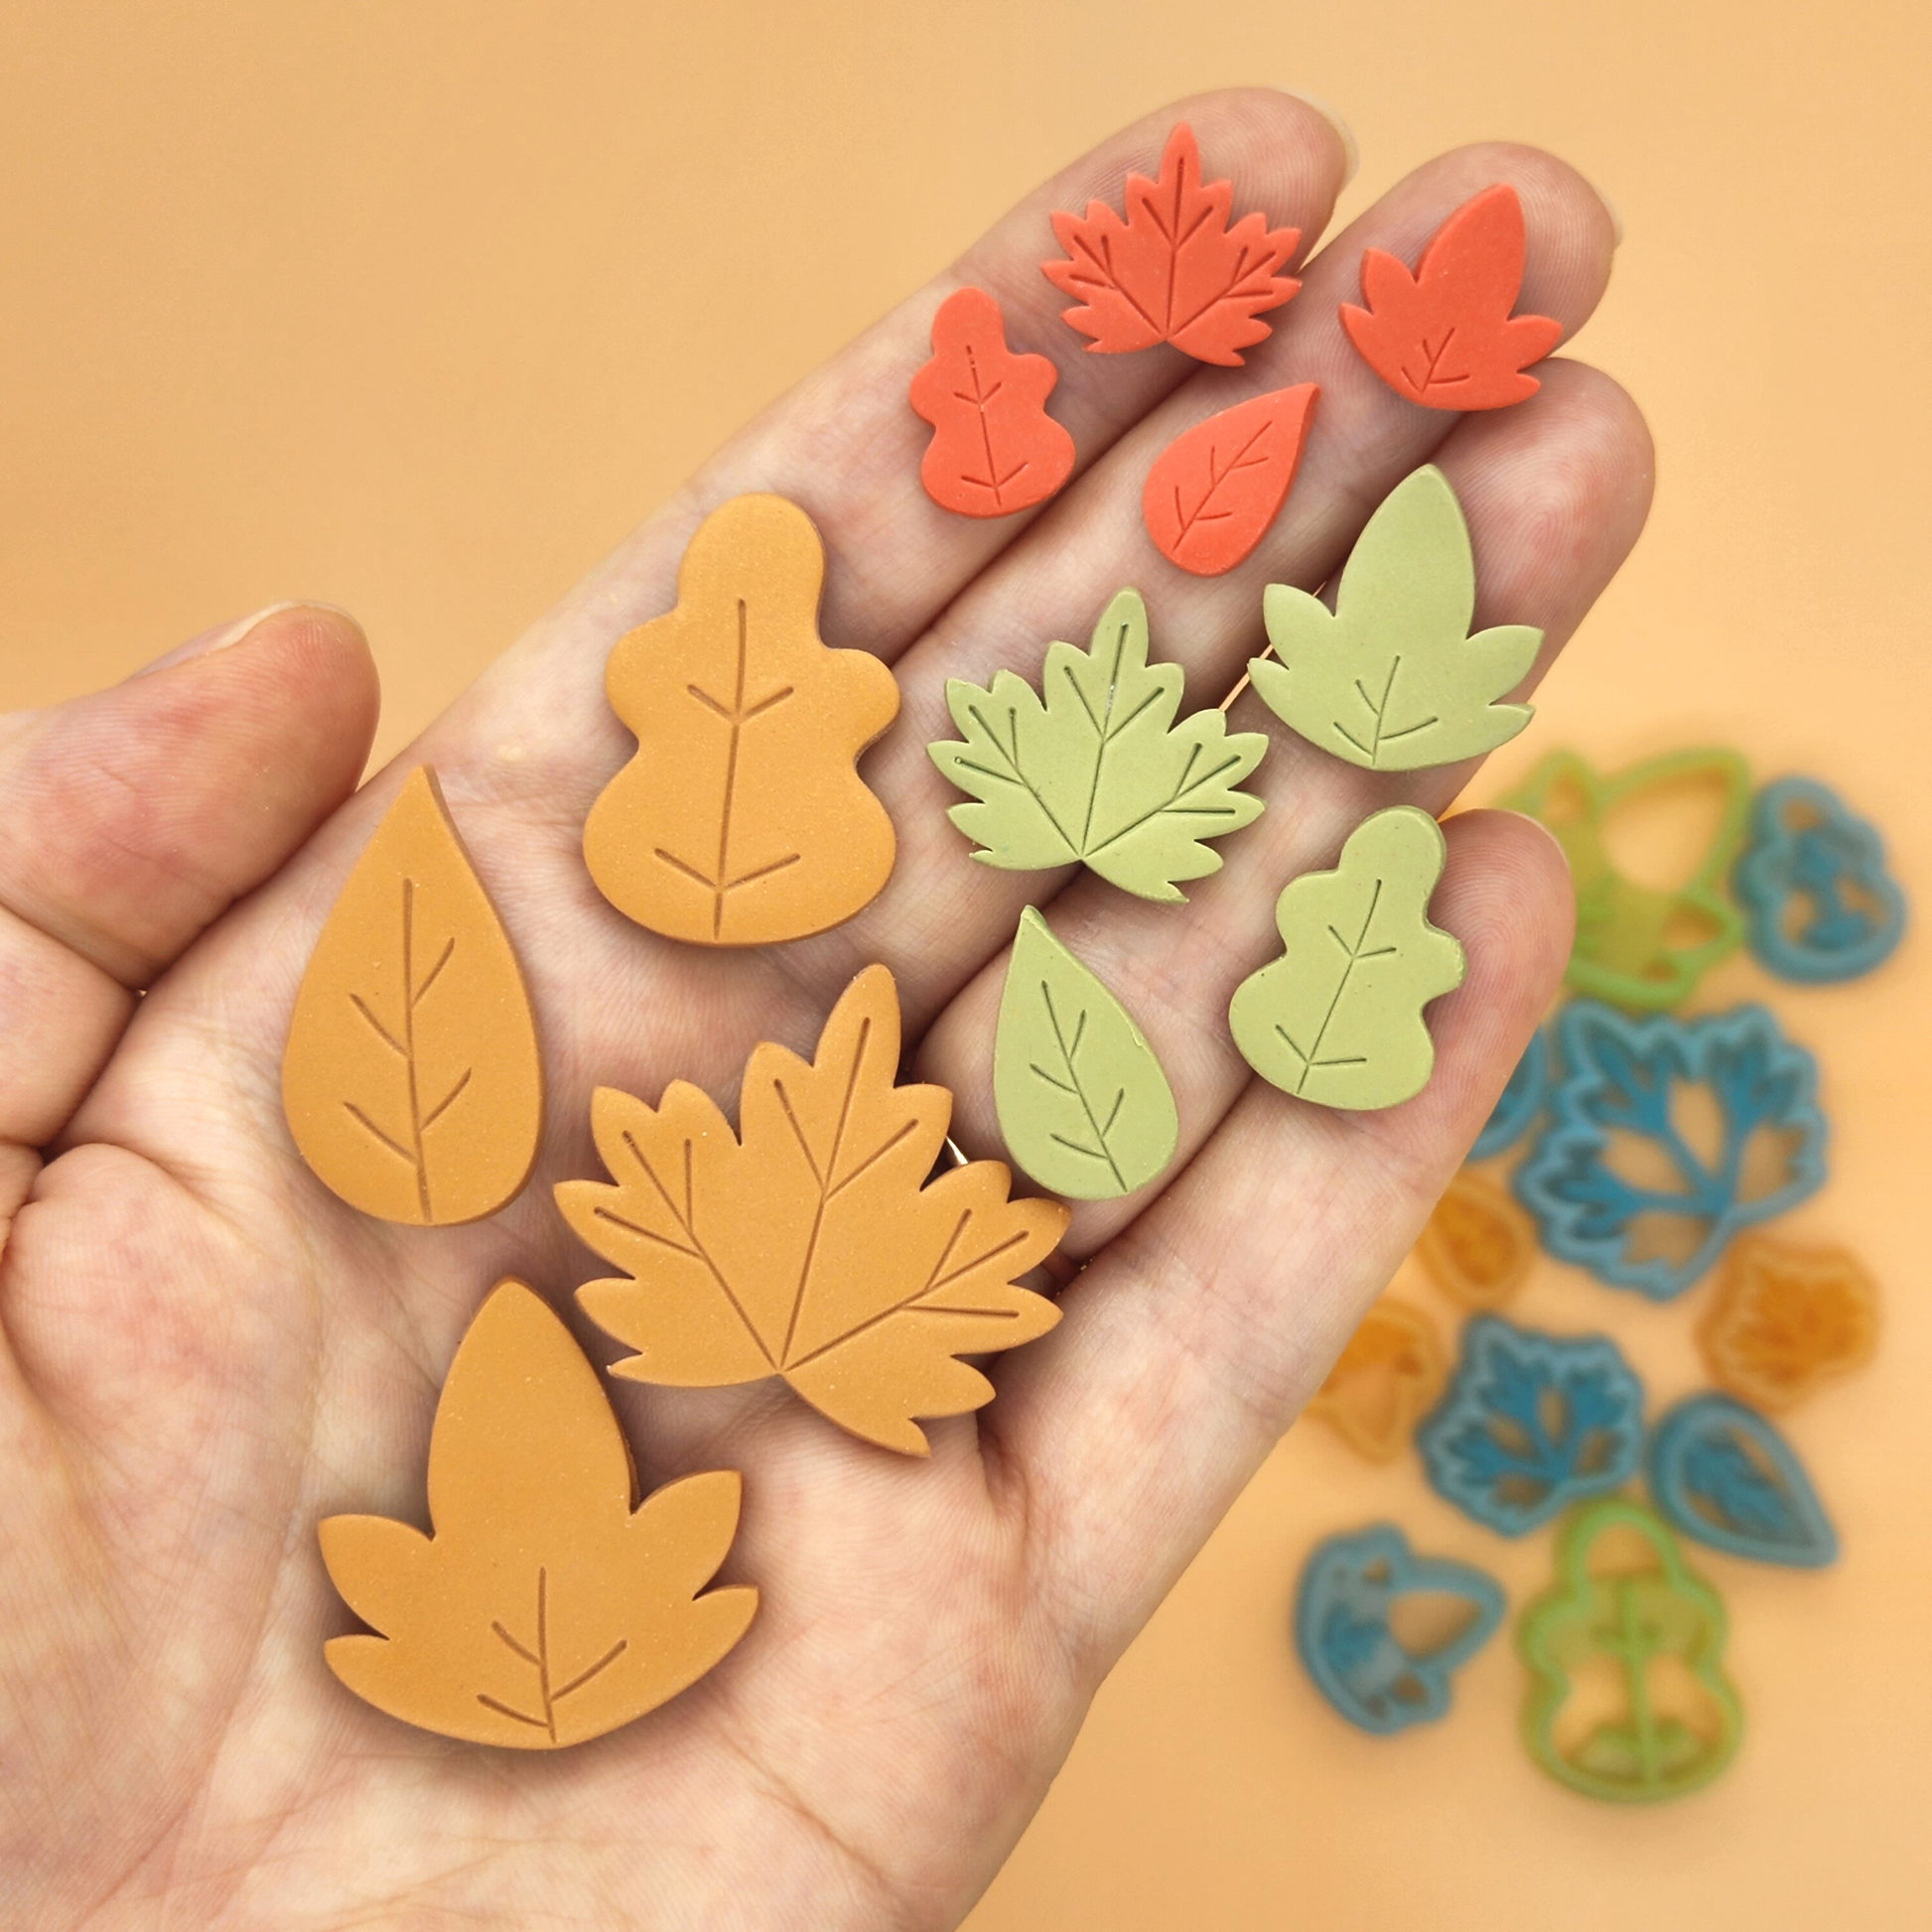 Autumn Fall Maple Leaves Polymer Clay Shape Earring Jewelry Charms Crafts